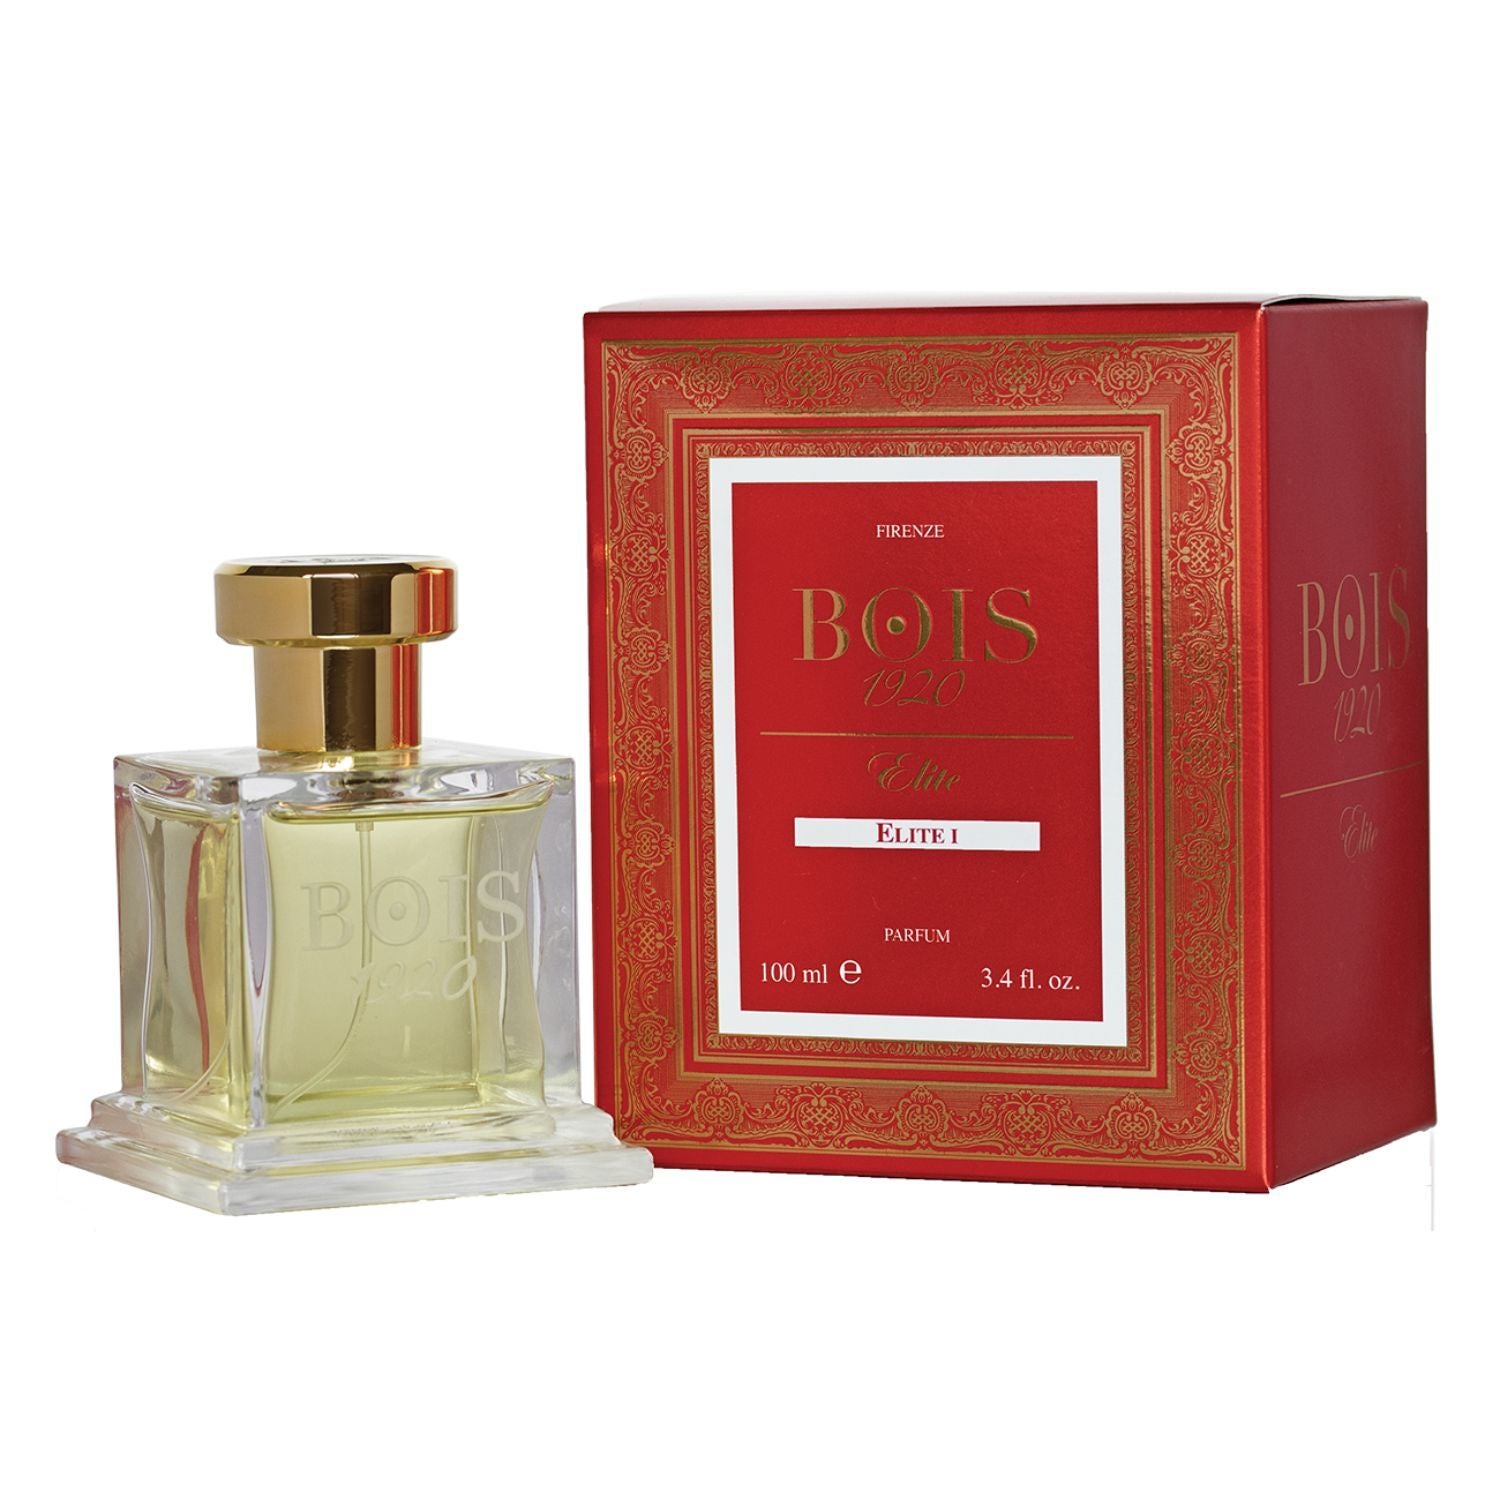 Bois 1920 – Elite I, A Citrusy Fragrance For Women And Men Released In 2019A Zesty Blend That Adds Freshness To Your Lifea Clean And Sparkling Composition Of Lemon, Mandarin Orange, Marine Notes, Gardenia And Lilythe Captivating Dark Base Of Sandalwood, Musk And Tonka Bean Adds A Sensual Trail On This Luminous Fragrance. Top Notes: Lemon And Mandarin Orange; Heart Notes: Sea Notes, Tuberose, Gardenia And Lily; Base Notes: Musk, Sandalwood, Vanilla And Tonka Bean.